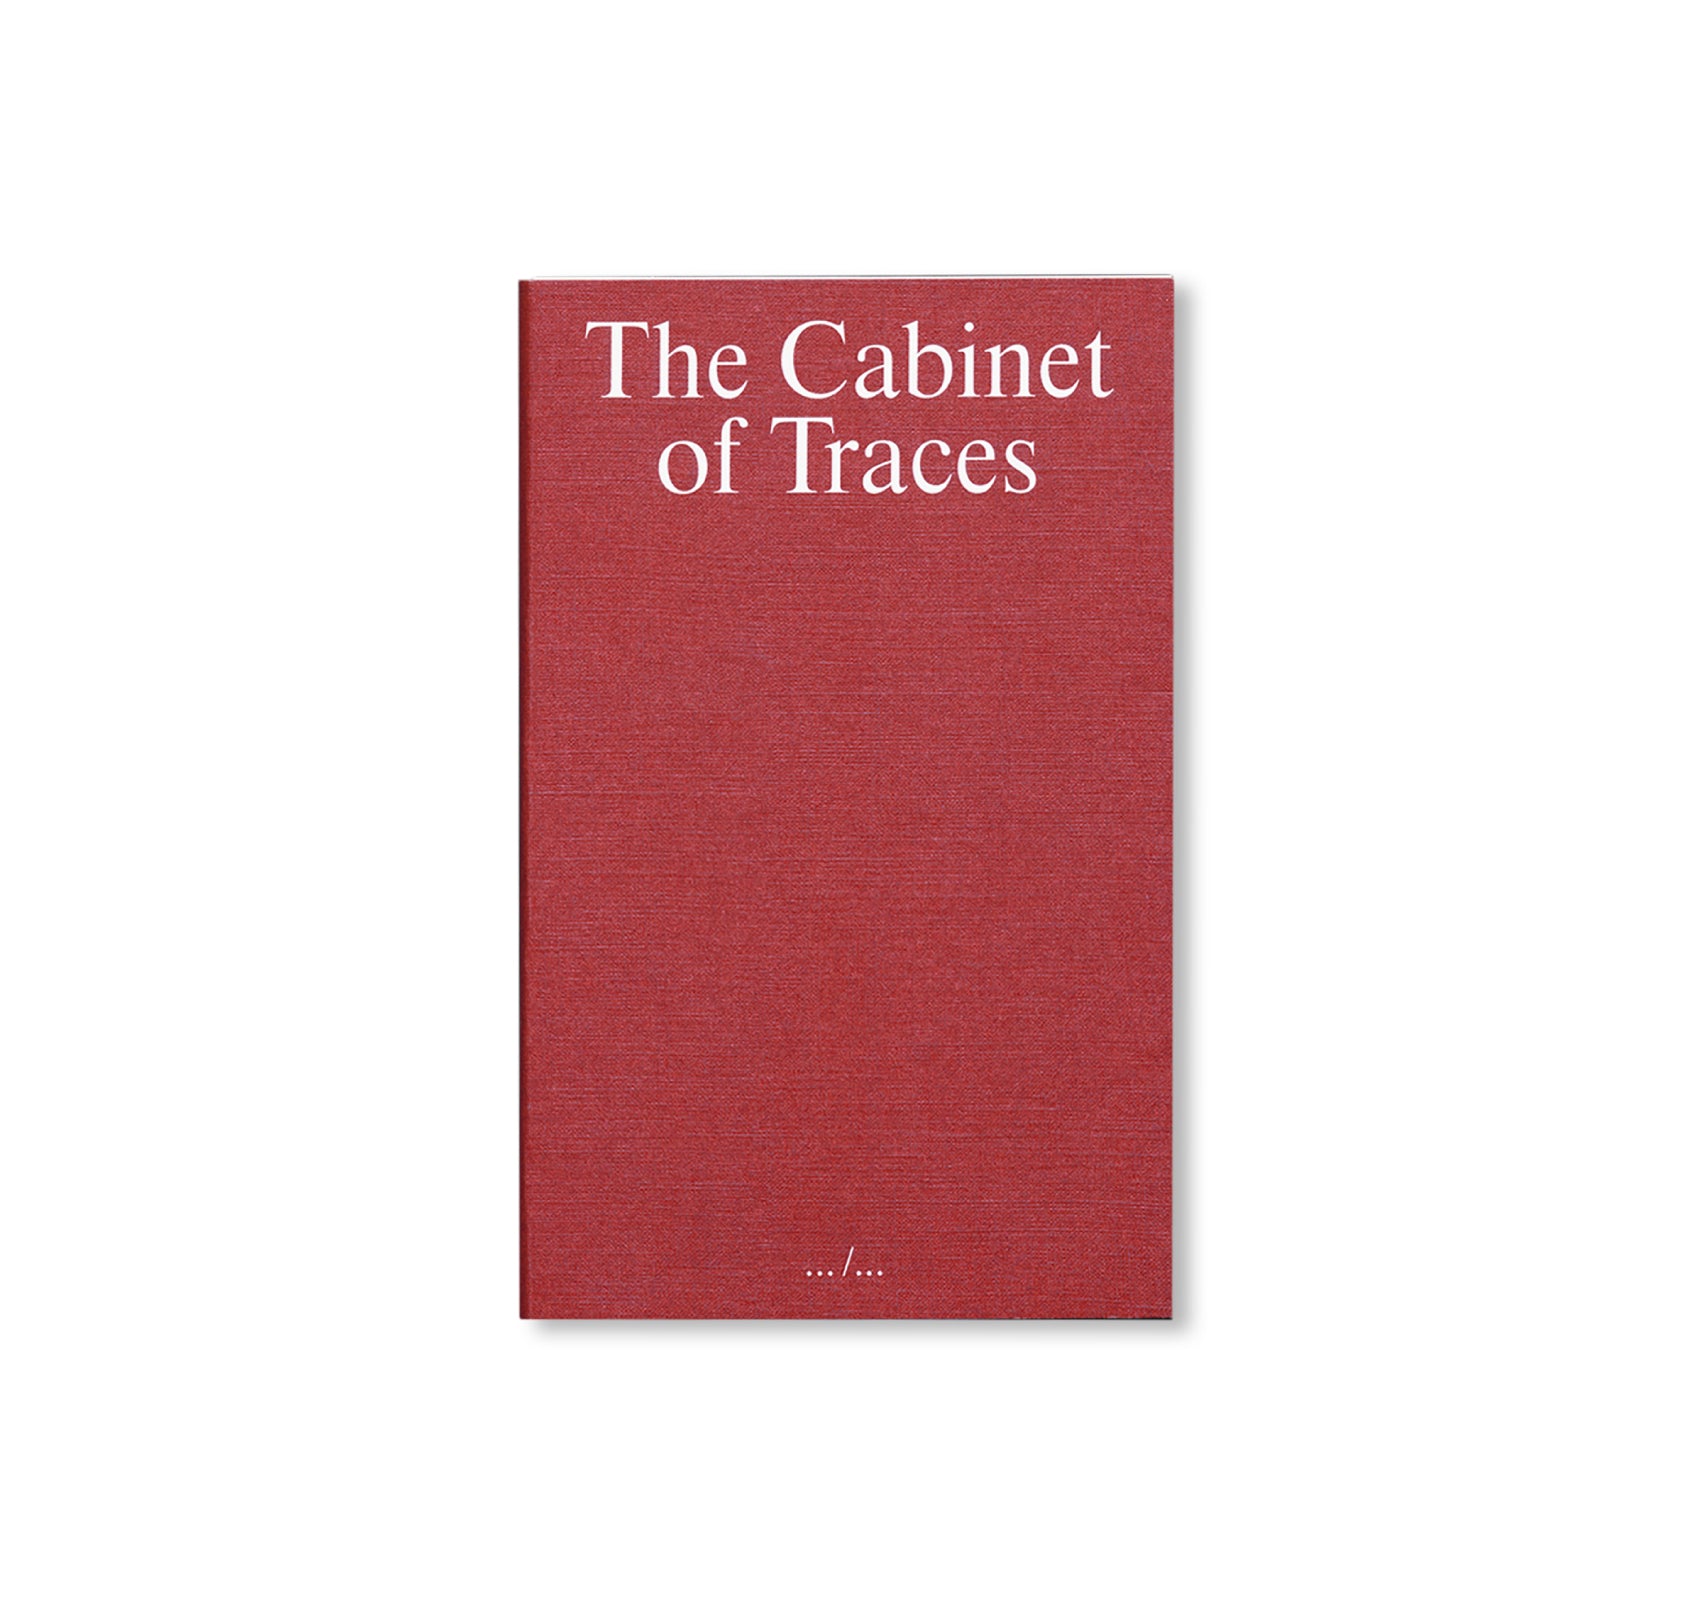 THE CABINET OF TRACES